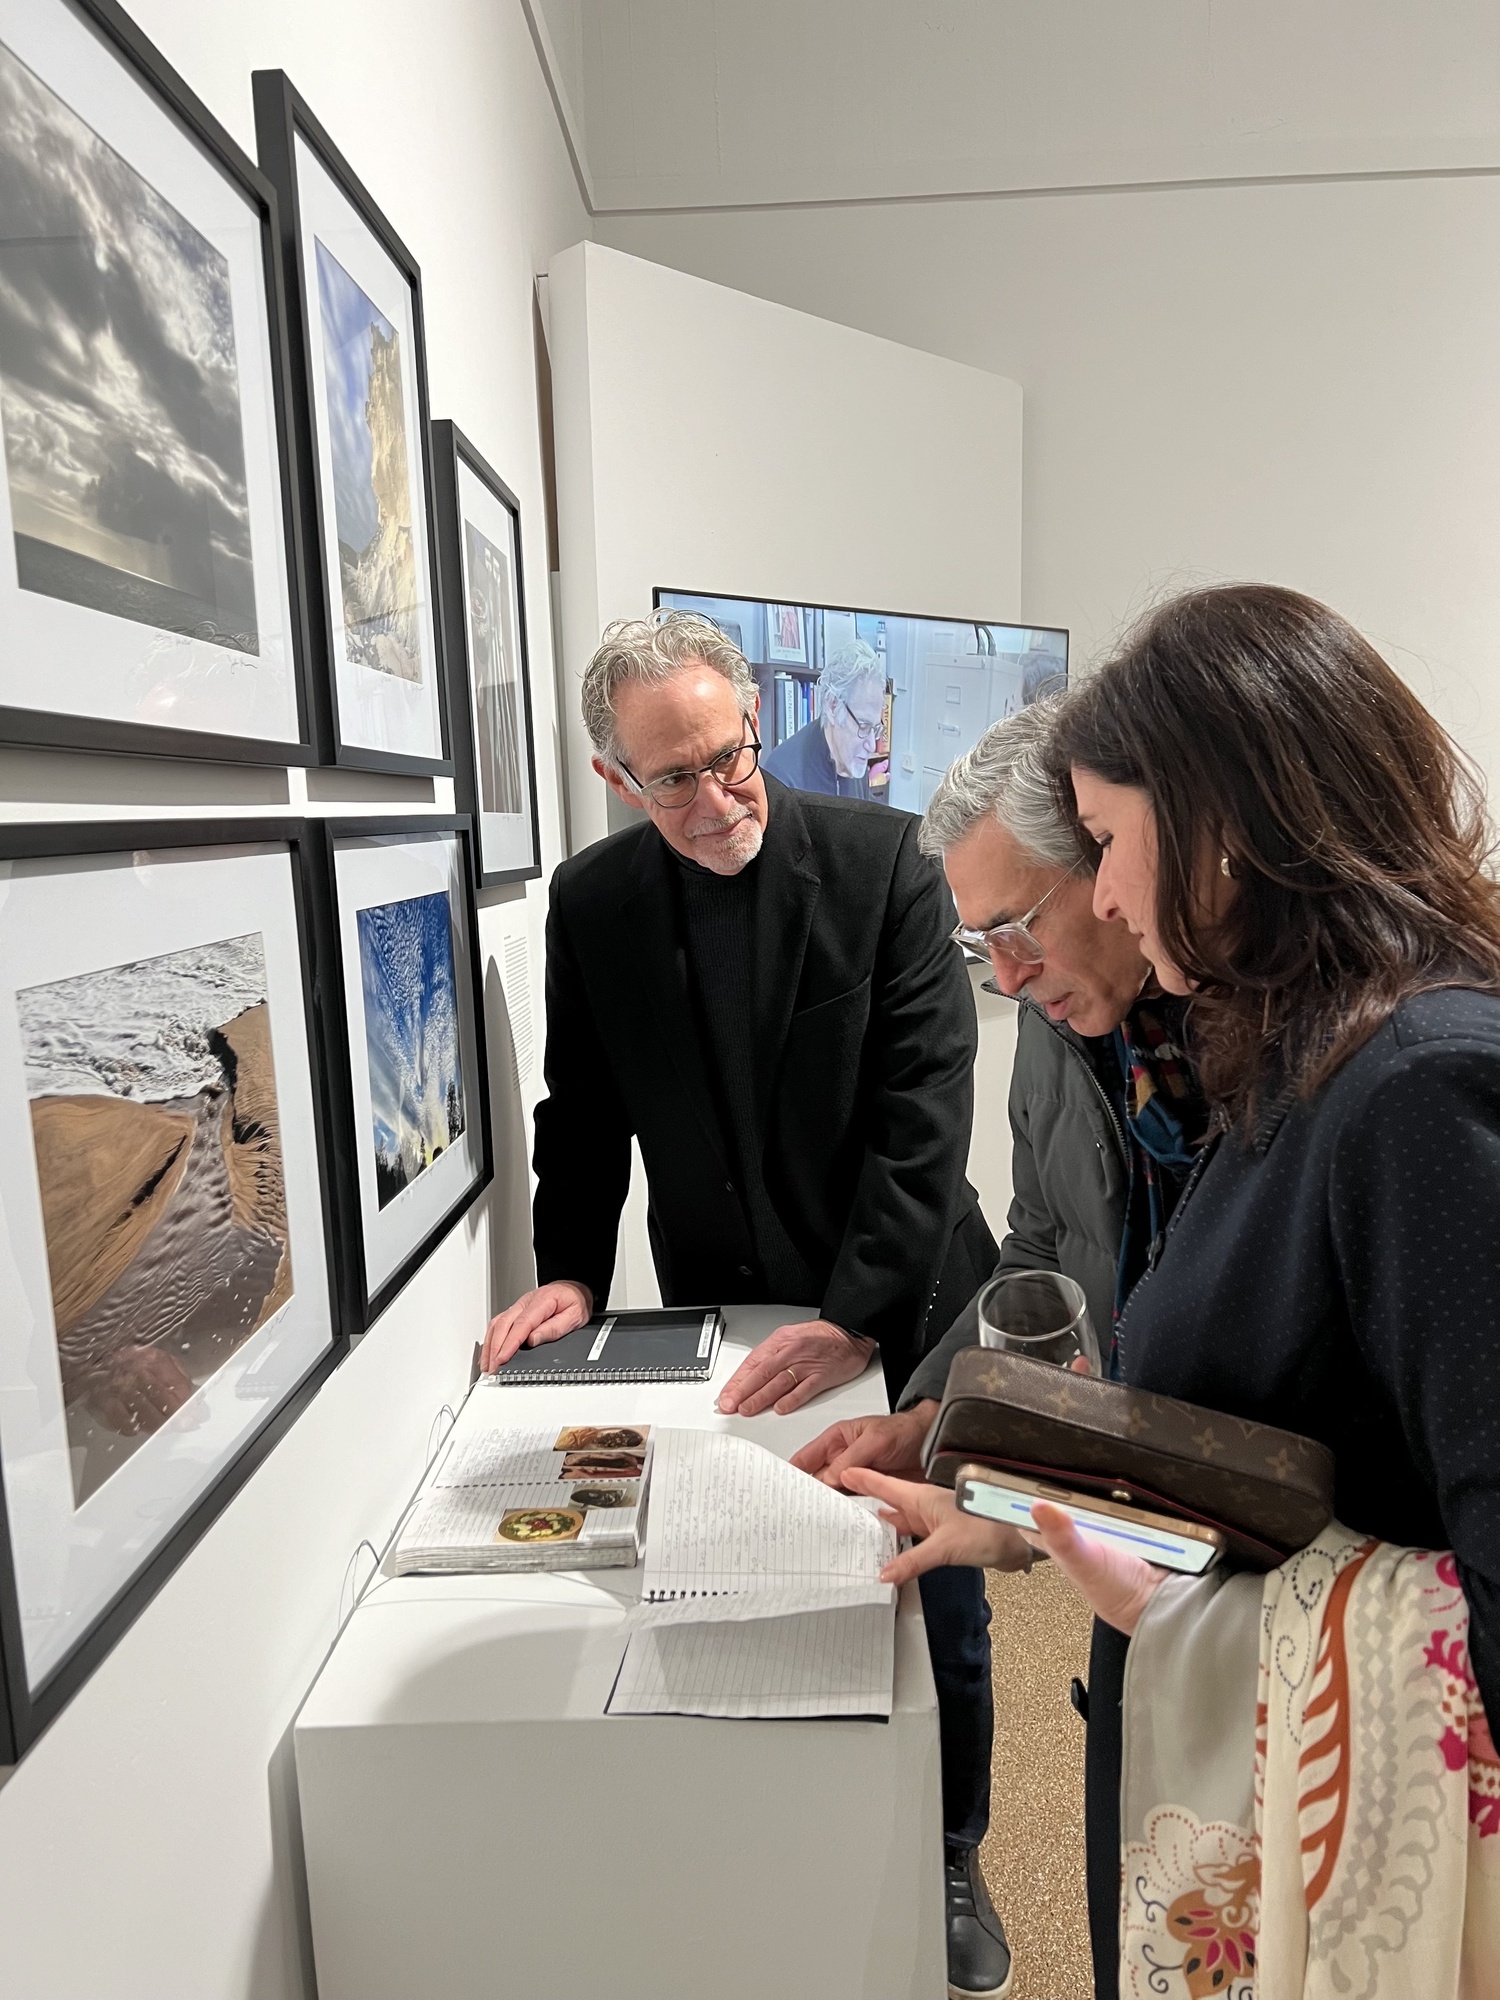 Peter Strugatz flips through one of John Buchbinder's memory books, on view at the Southampton Arts Center in the exhibition 